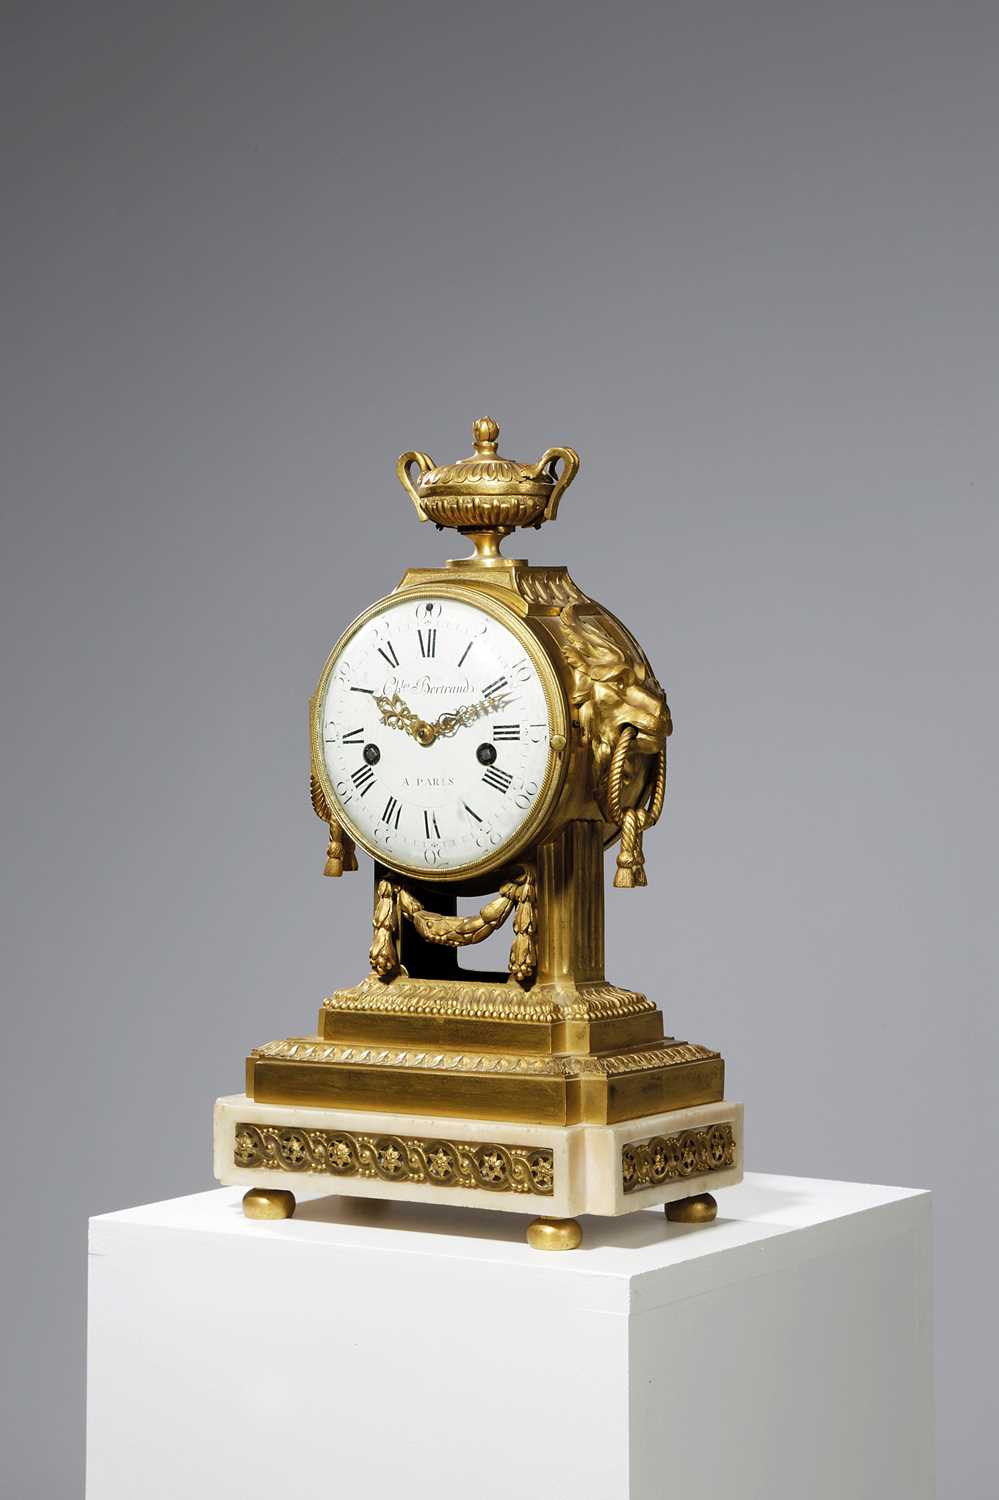 A FRENCH WHITE MARBLE AND ORMOLU MANTEL CLOCKBY CHARLES BERTRAND, PARIS, LATE 18TH CENTURYthe